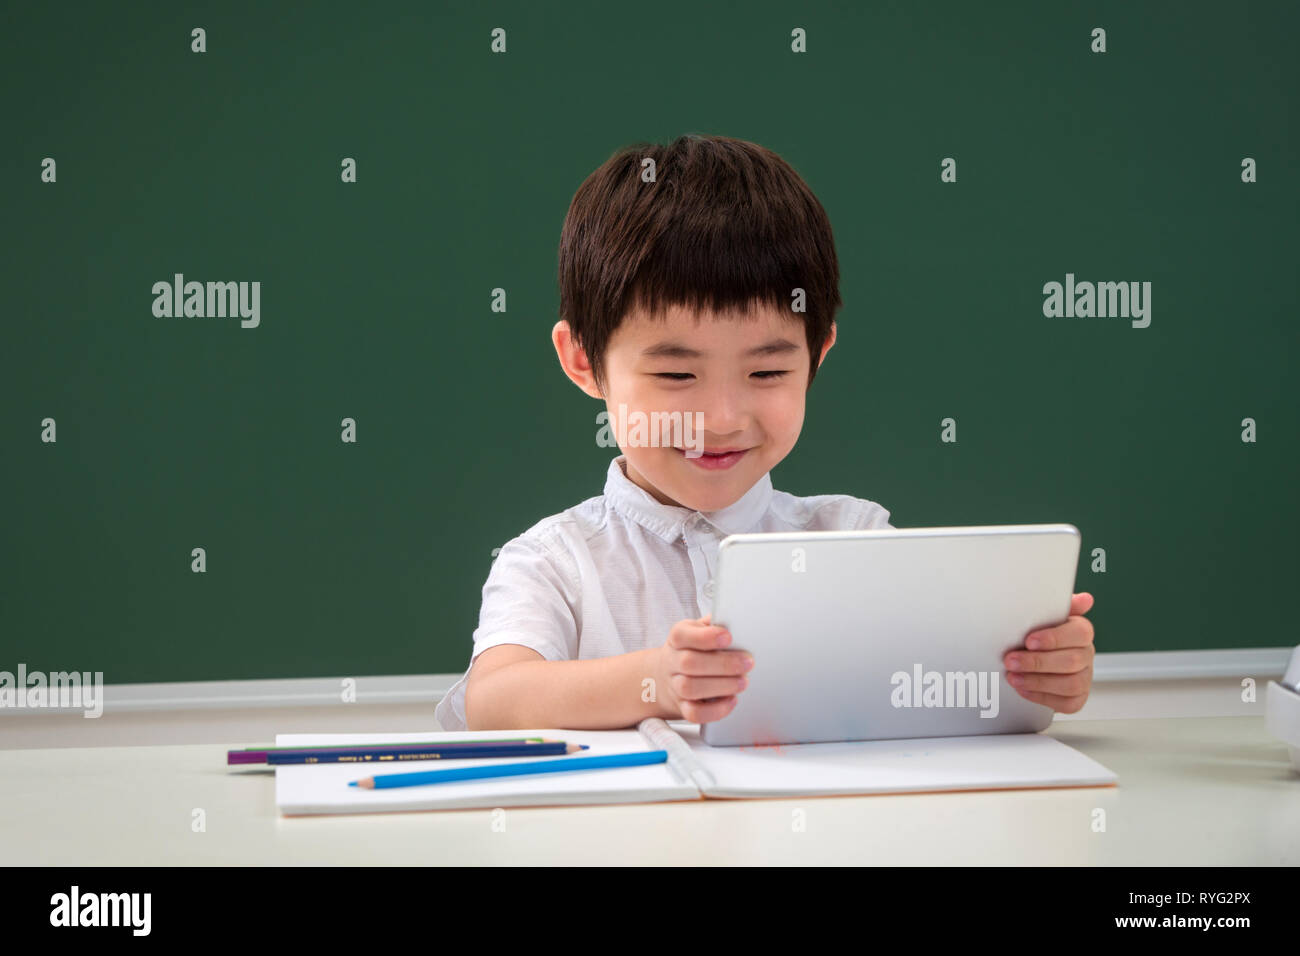 Elementary School Students Online Learning Stock Photo Alamy